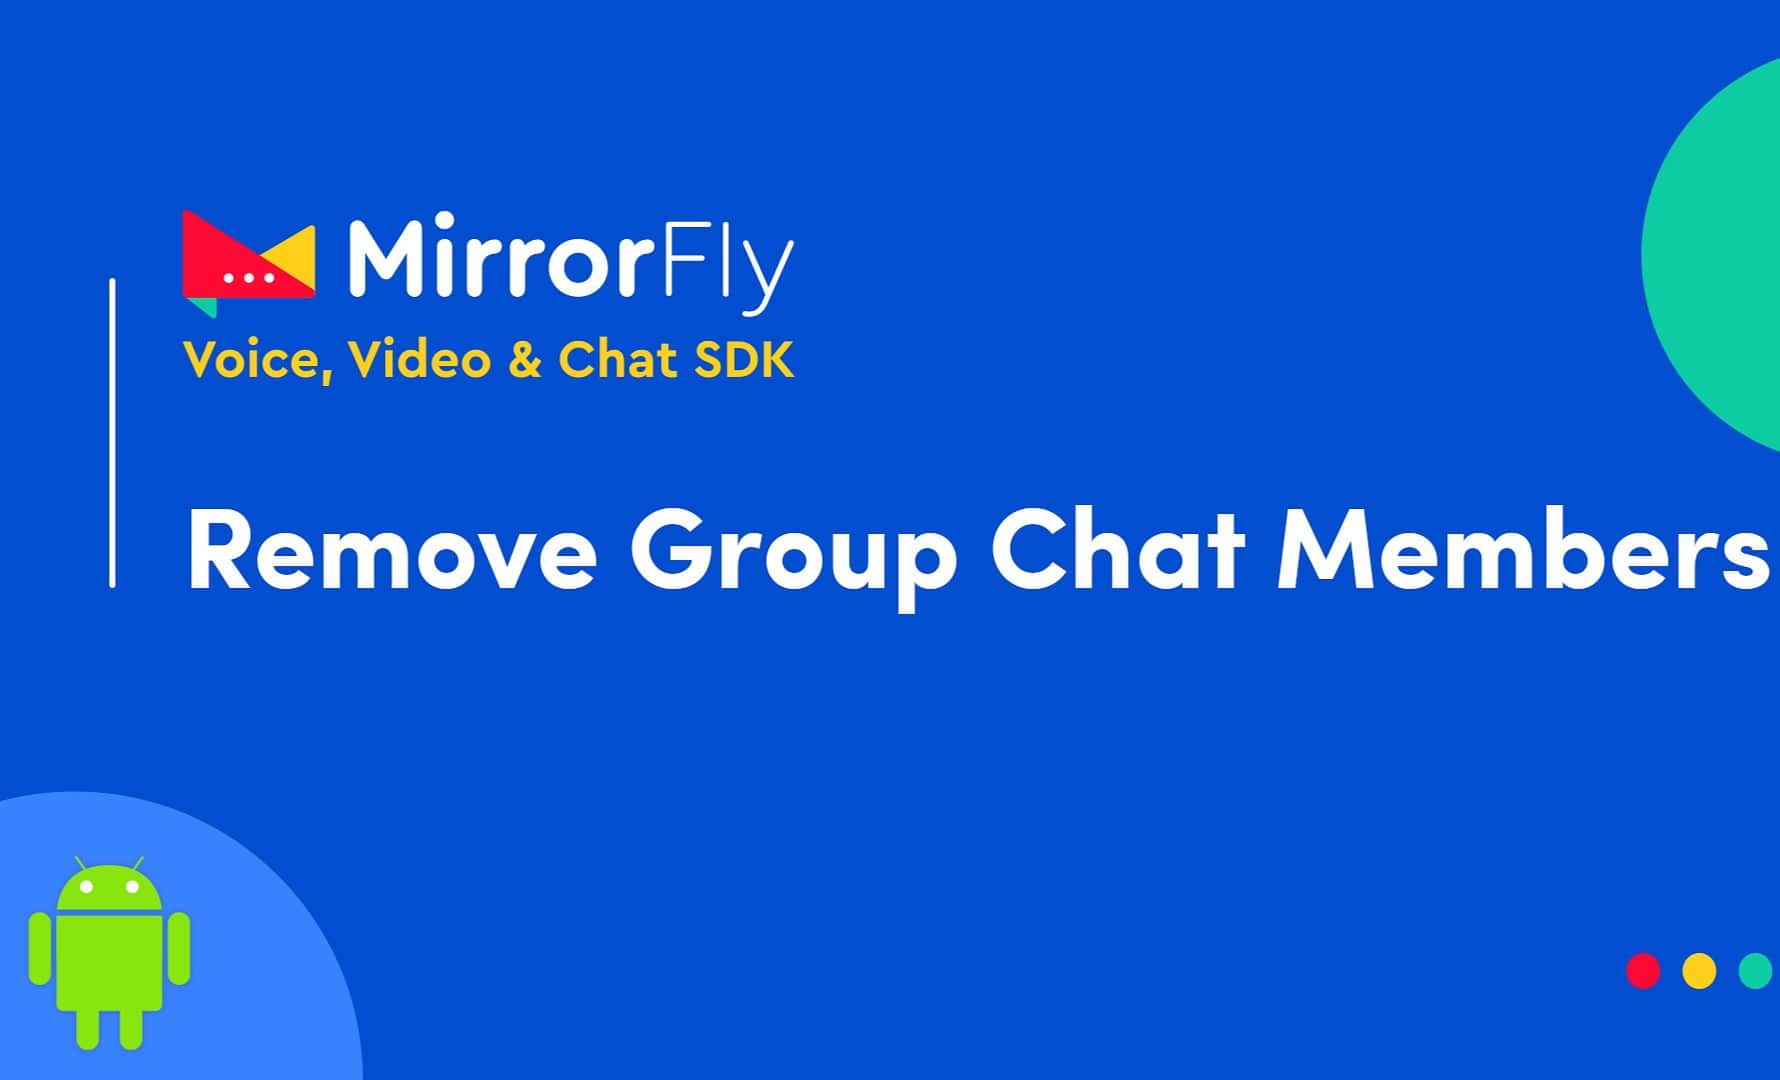 Remove Group Chat Members using SDK in Android